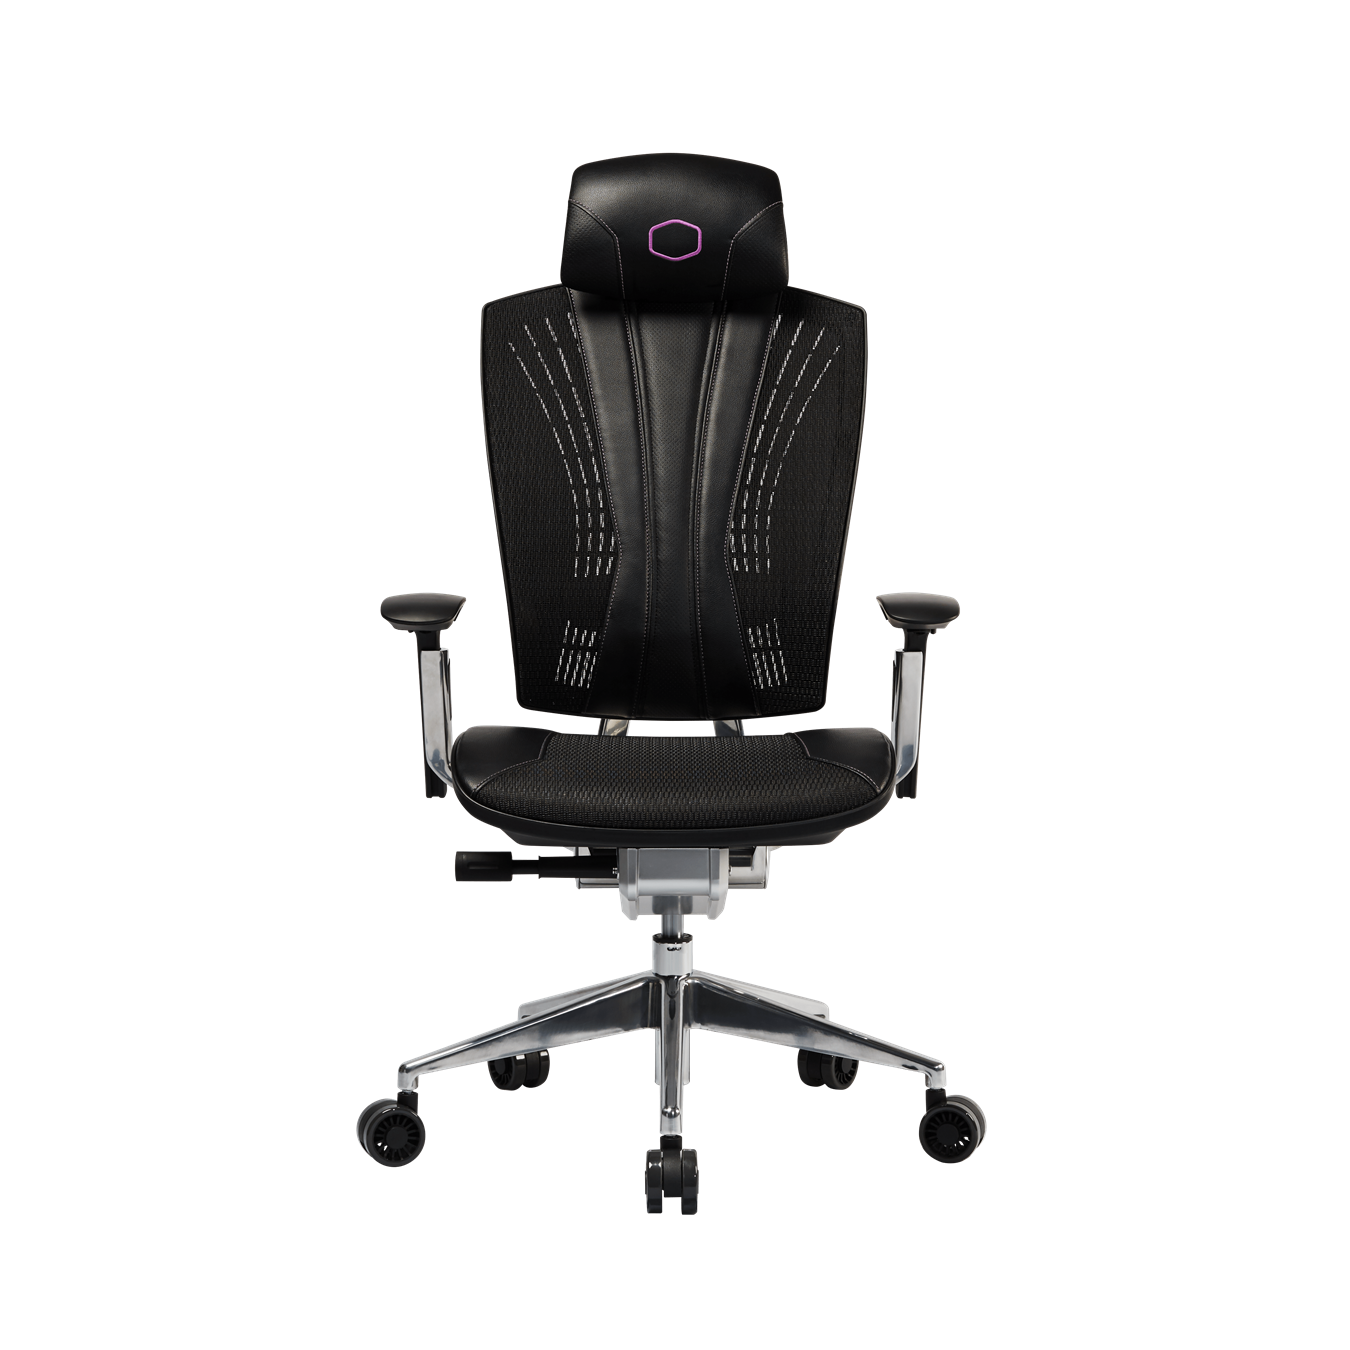 ERGO L - Front angle view